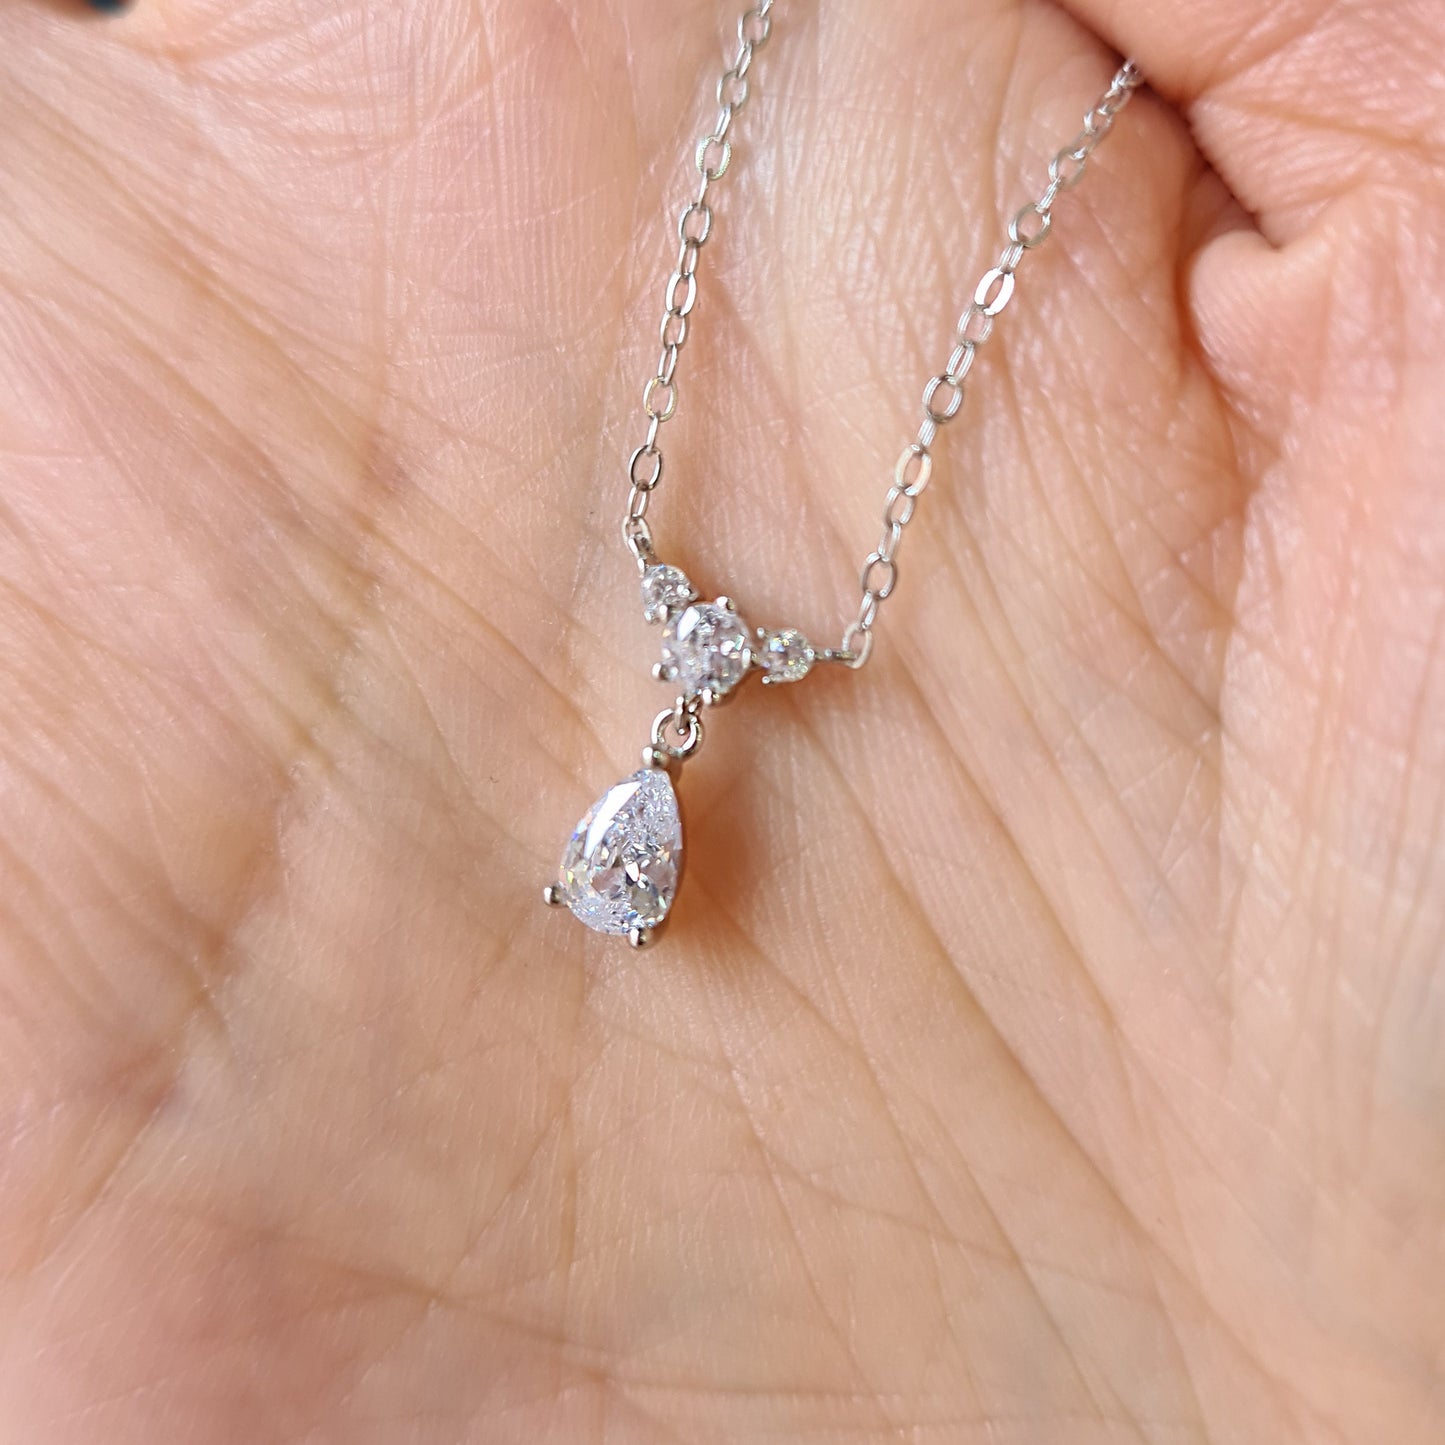 Sparkly Small Diamante Teardrop Crystal Necklace Sterling Silver Chain Bridal Wedding Jewellery Bridesmaids